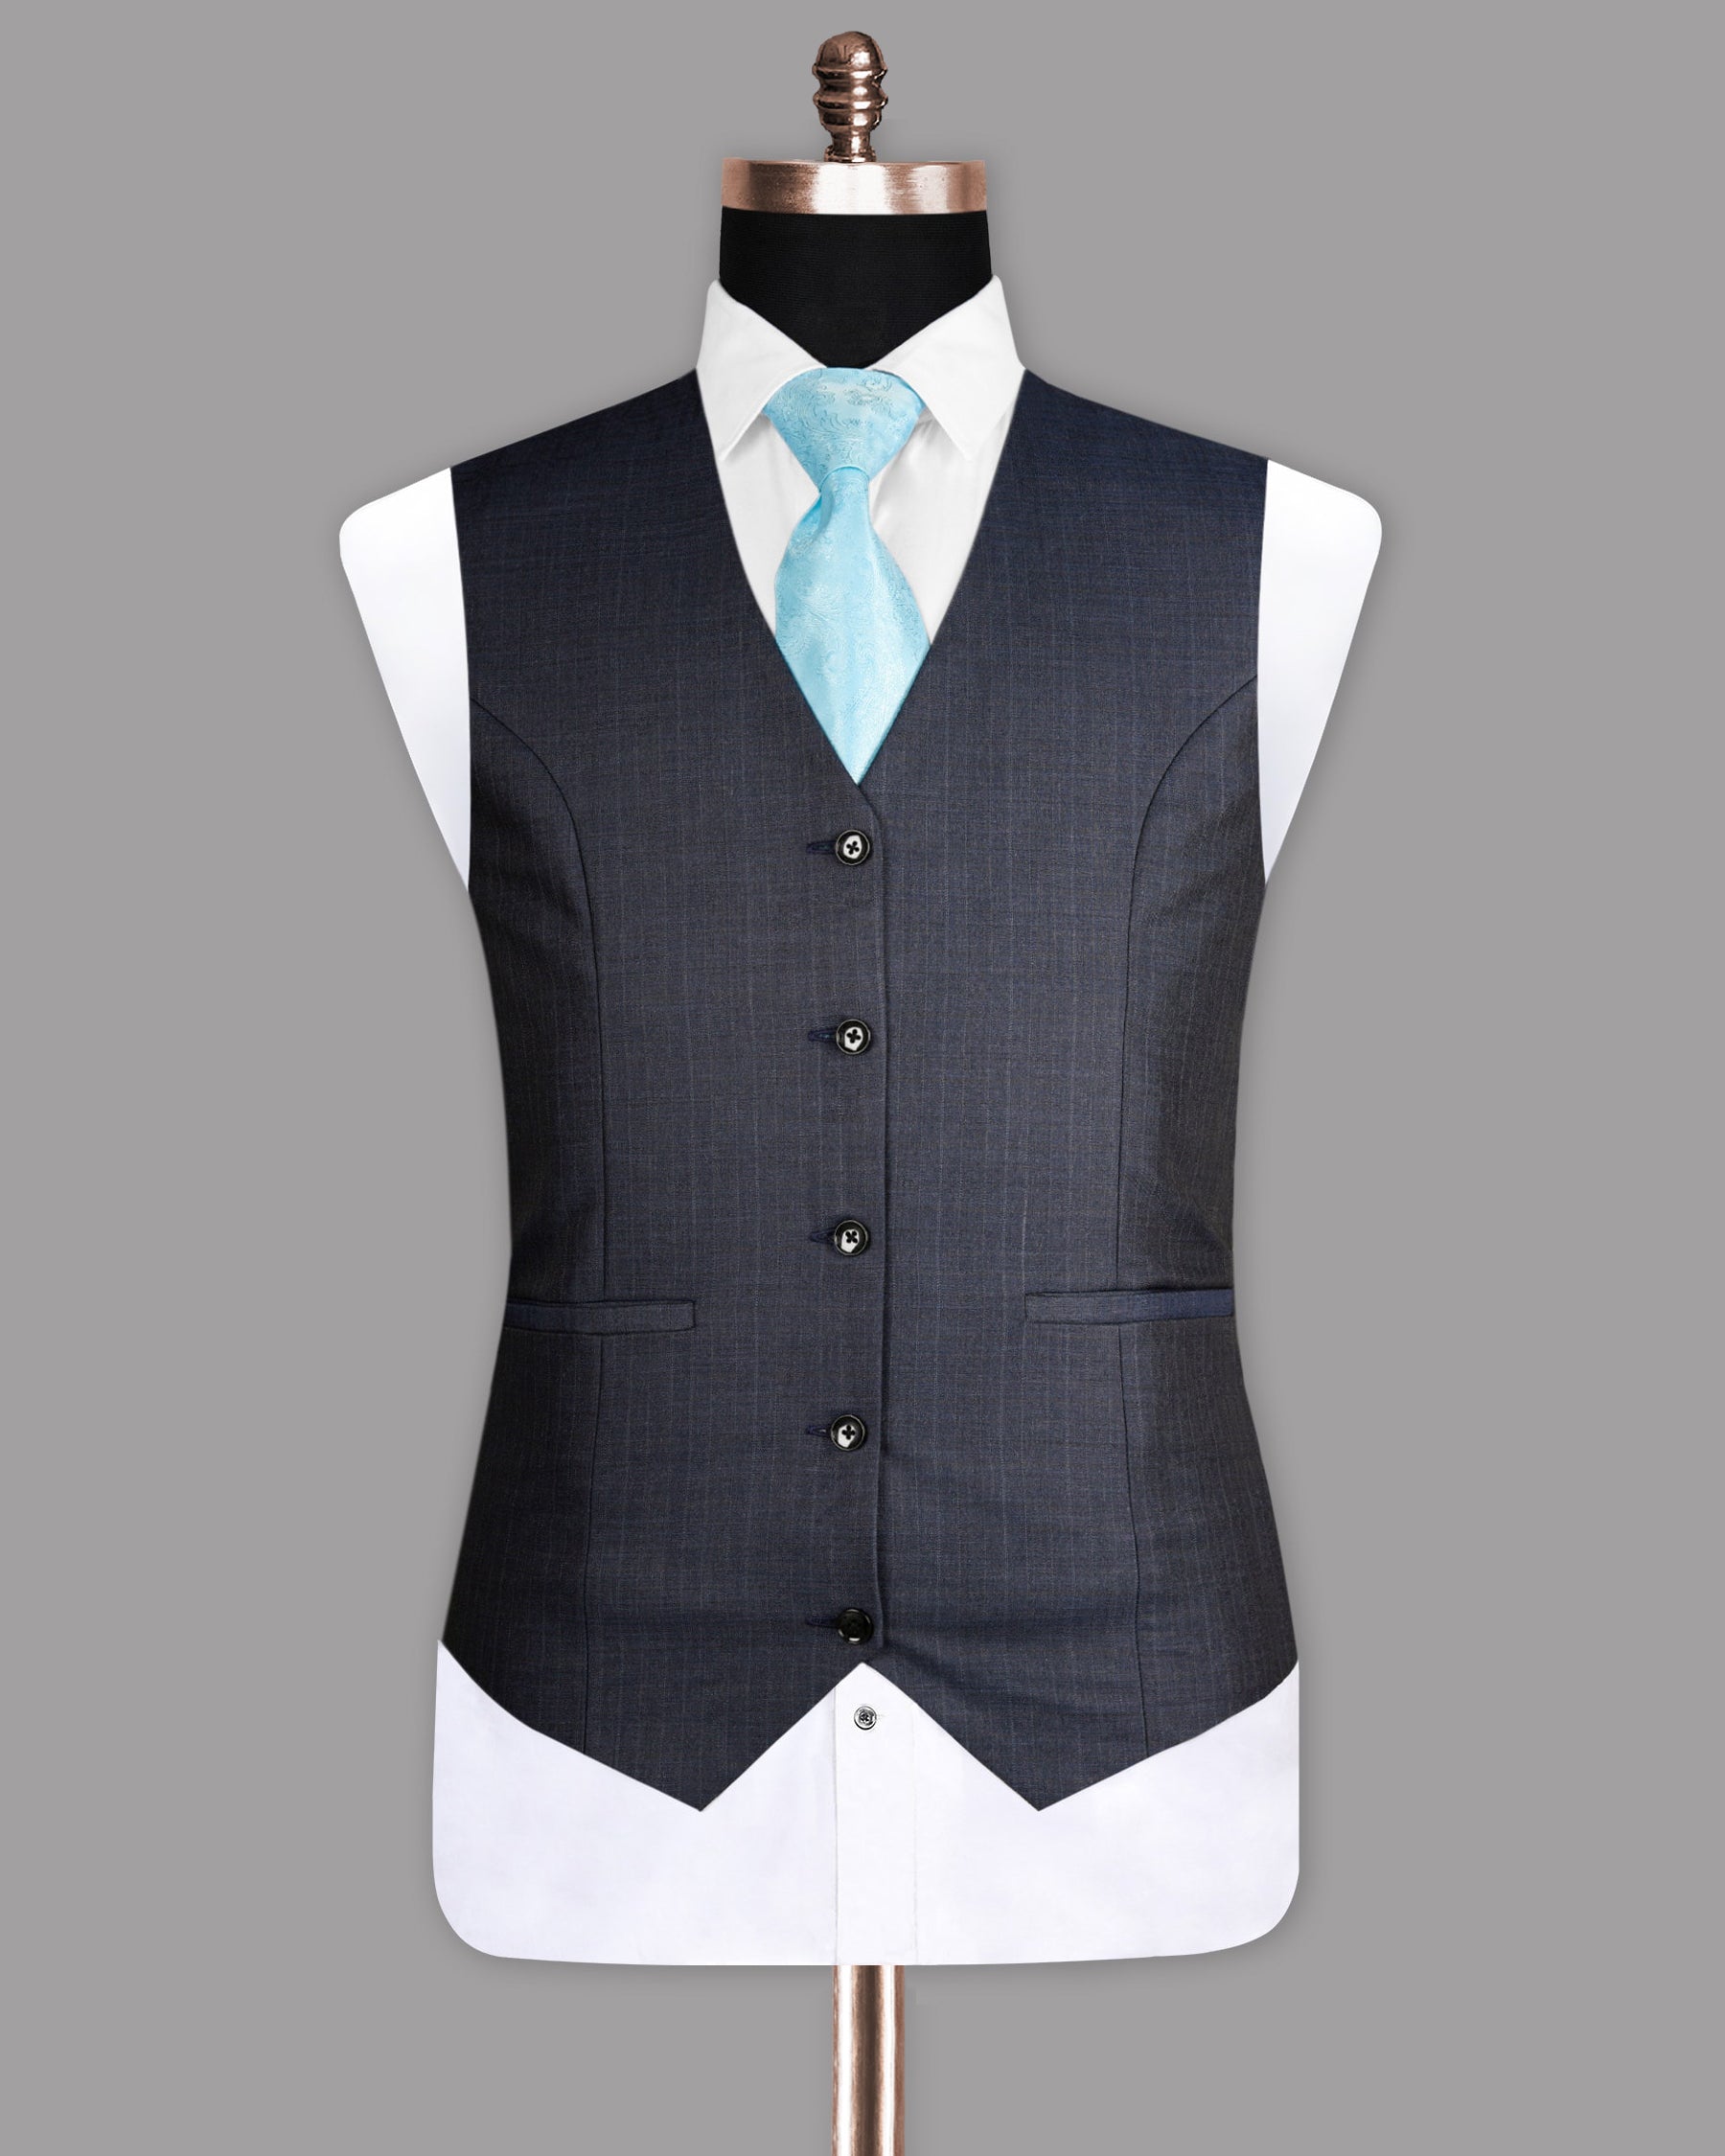 Ship Gray with Blue Tonal Subtle Checked Waistcoat V1033-38, V1033-52, V1033-54, V1033-44, V1033-50, V1033-56, V1033-60, V1033-48, V1033-40, V1033-58, V1033-46, V1033-36, V1033-42